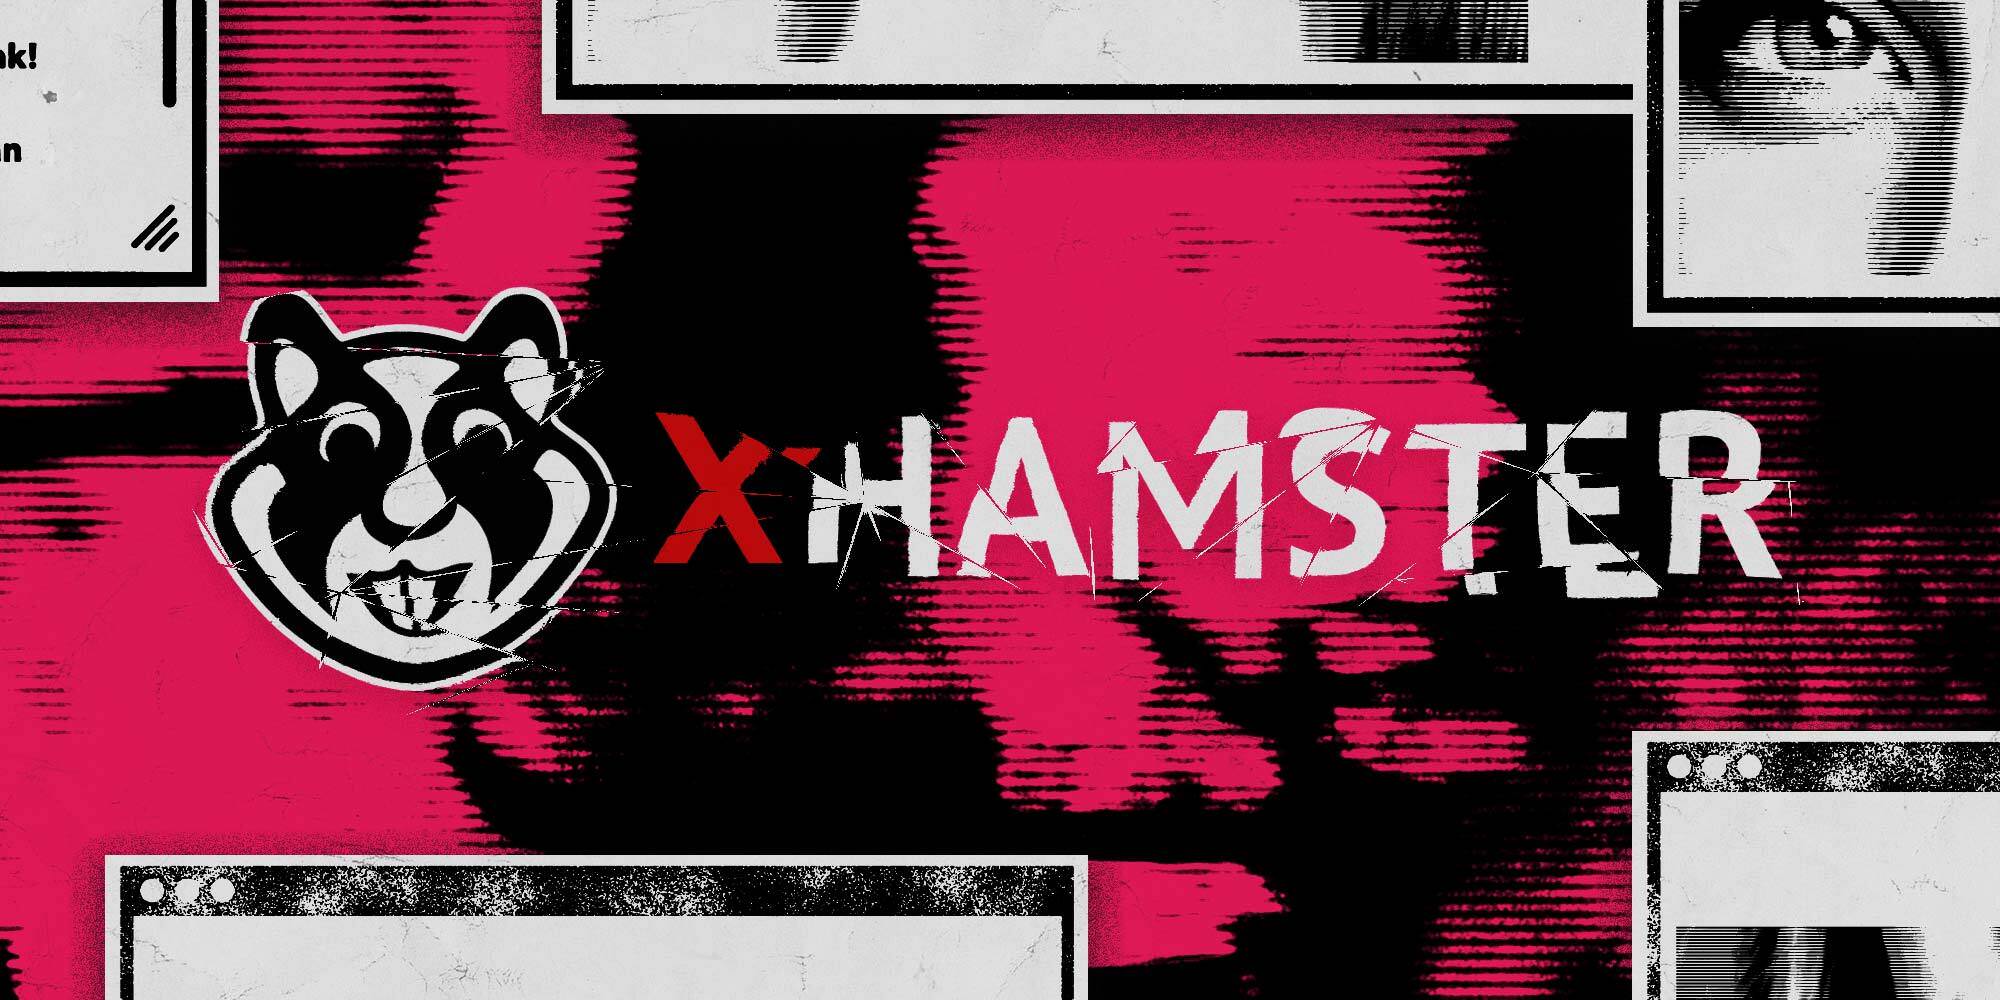 Xhamiter - xHamster Reportedly Uses an Unpaid, Untrained, Volunteer Team to Moderate  Content